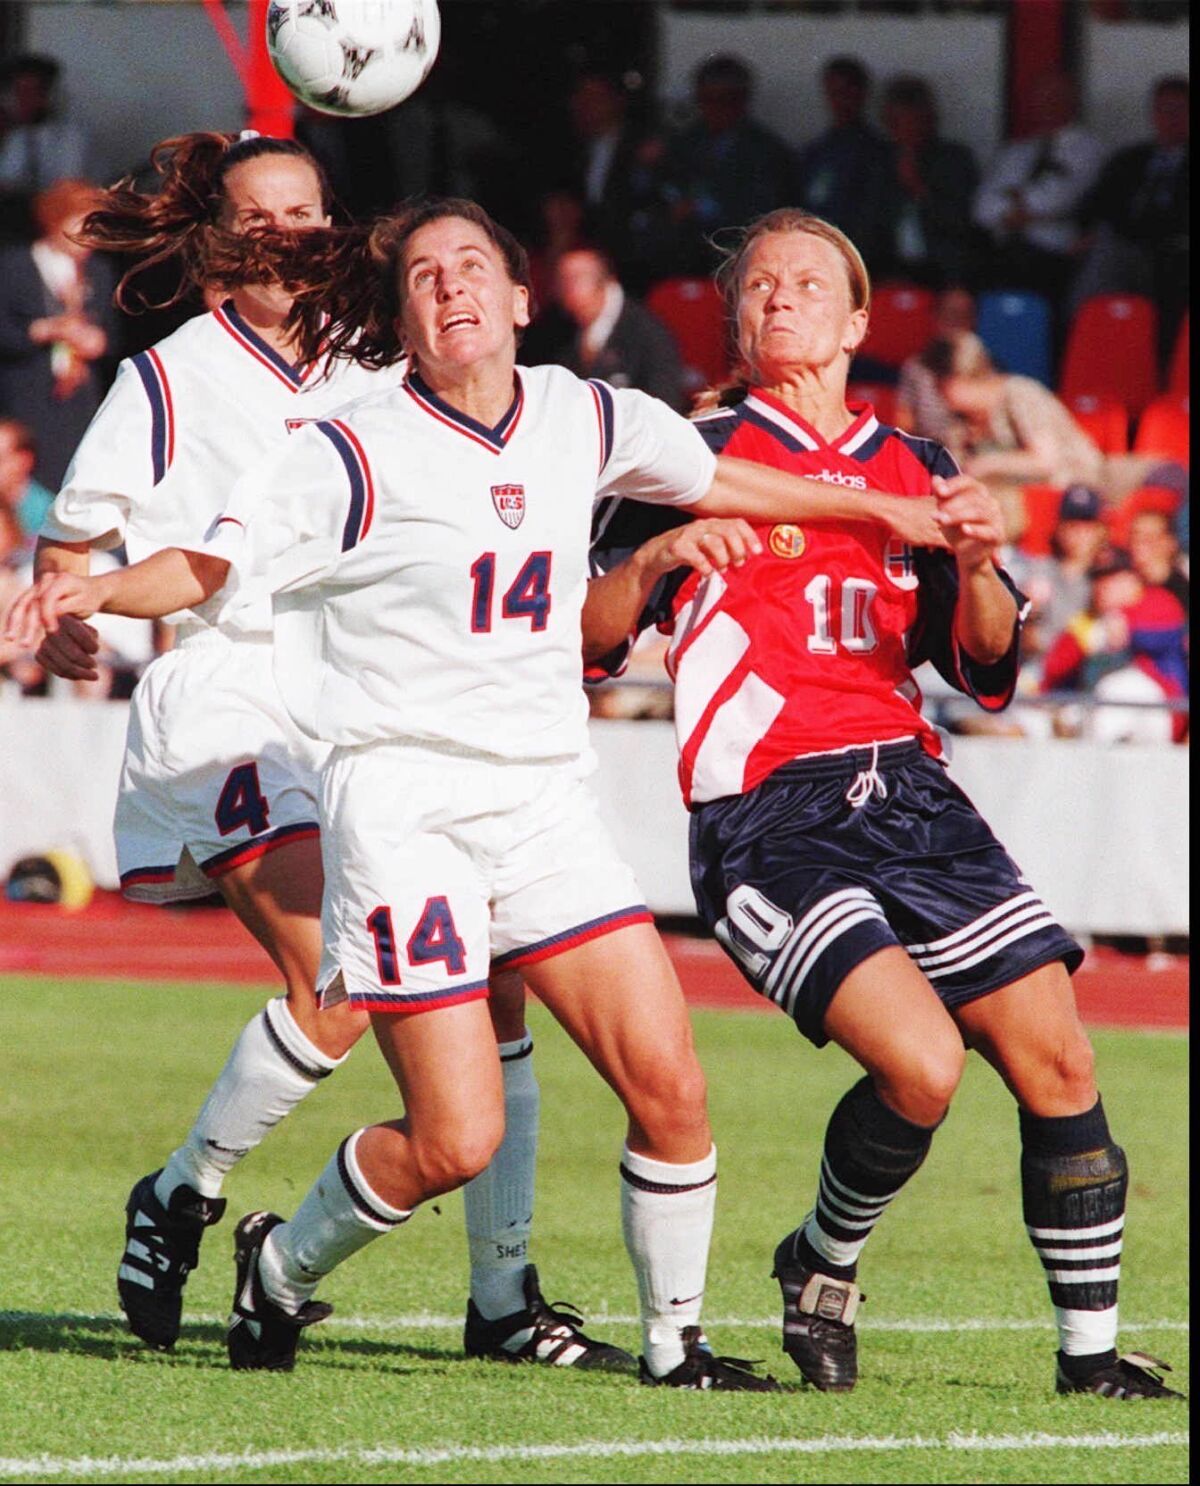 USAs Joy Fawcett, left, fights for the ball with Norway s Linda Medalen during the Women s Soccer World Cup semifinals in Vasteras, Sweden, June,15 1995. Norway defeated USA 1-0 and are ready for the final in Stockholm on Sunday, June 18.